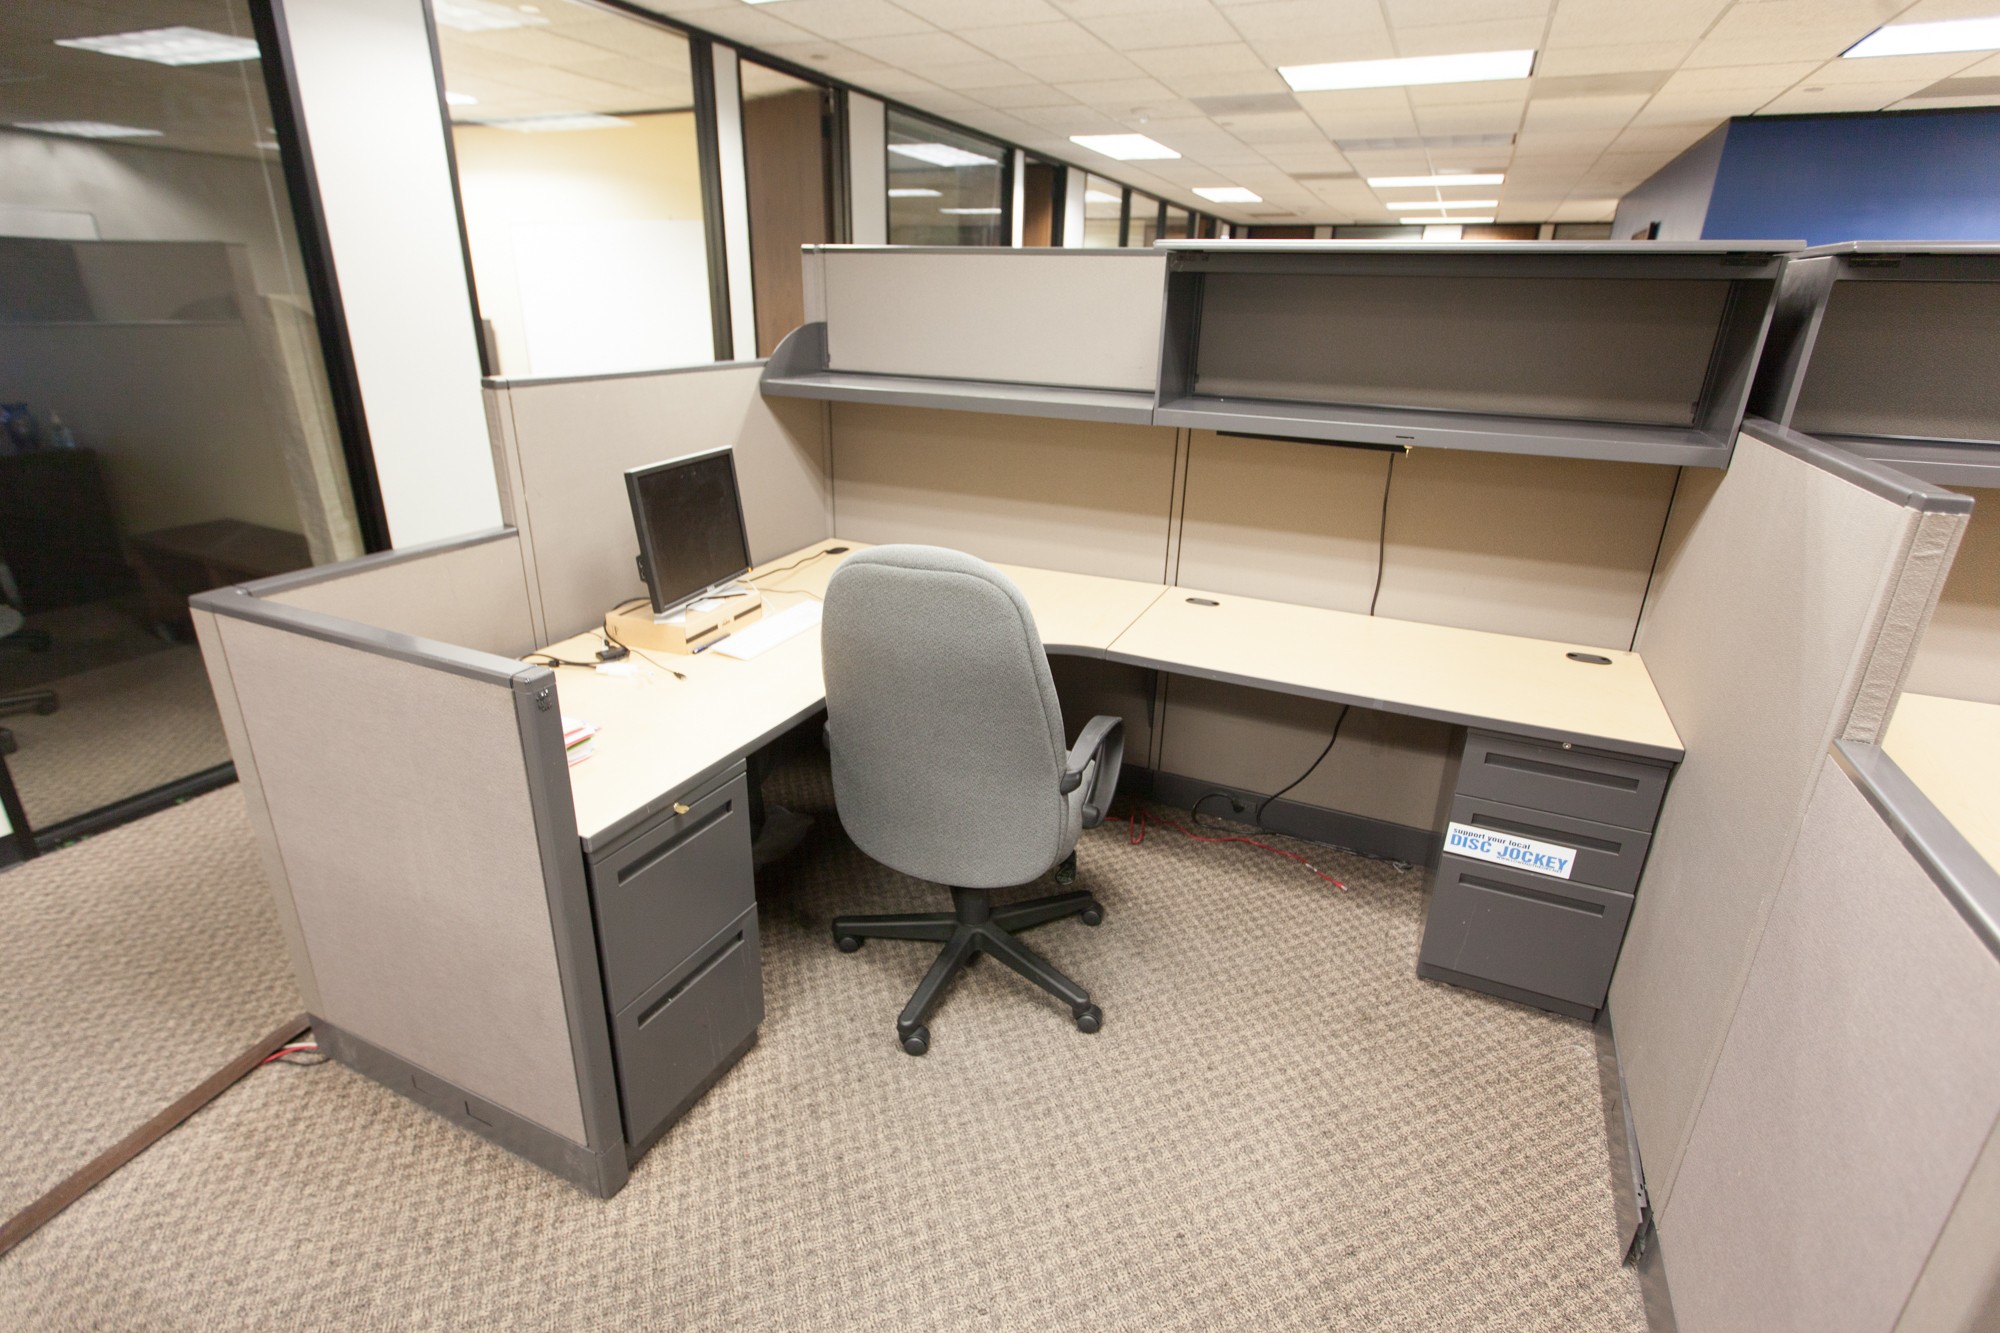 Steelcase Cubicles for Offices-1209